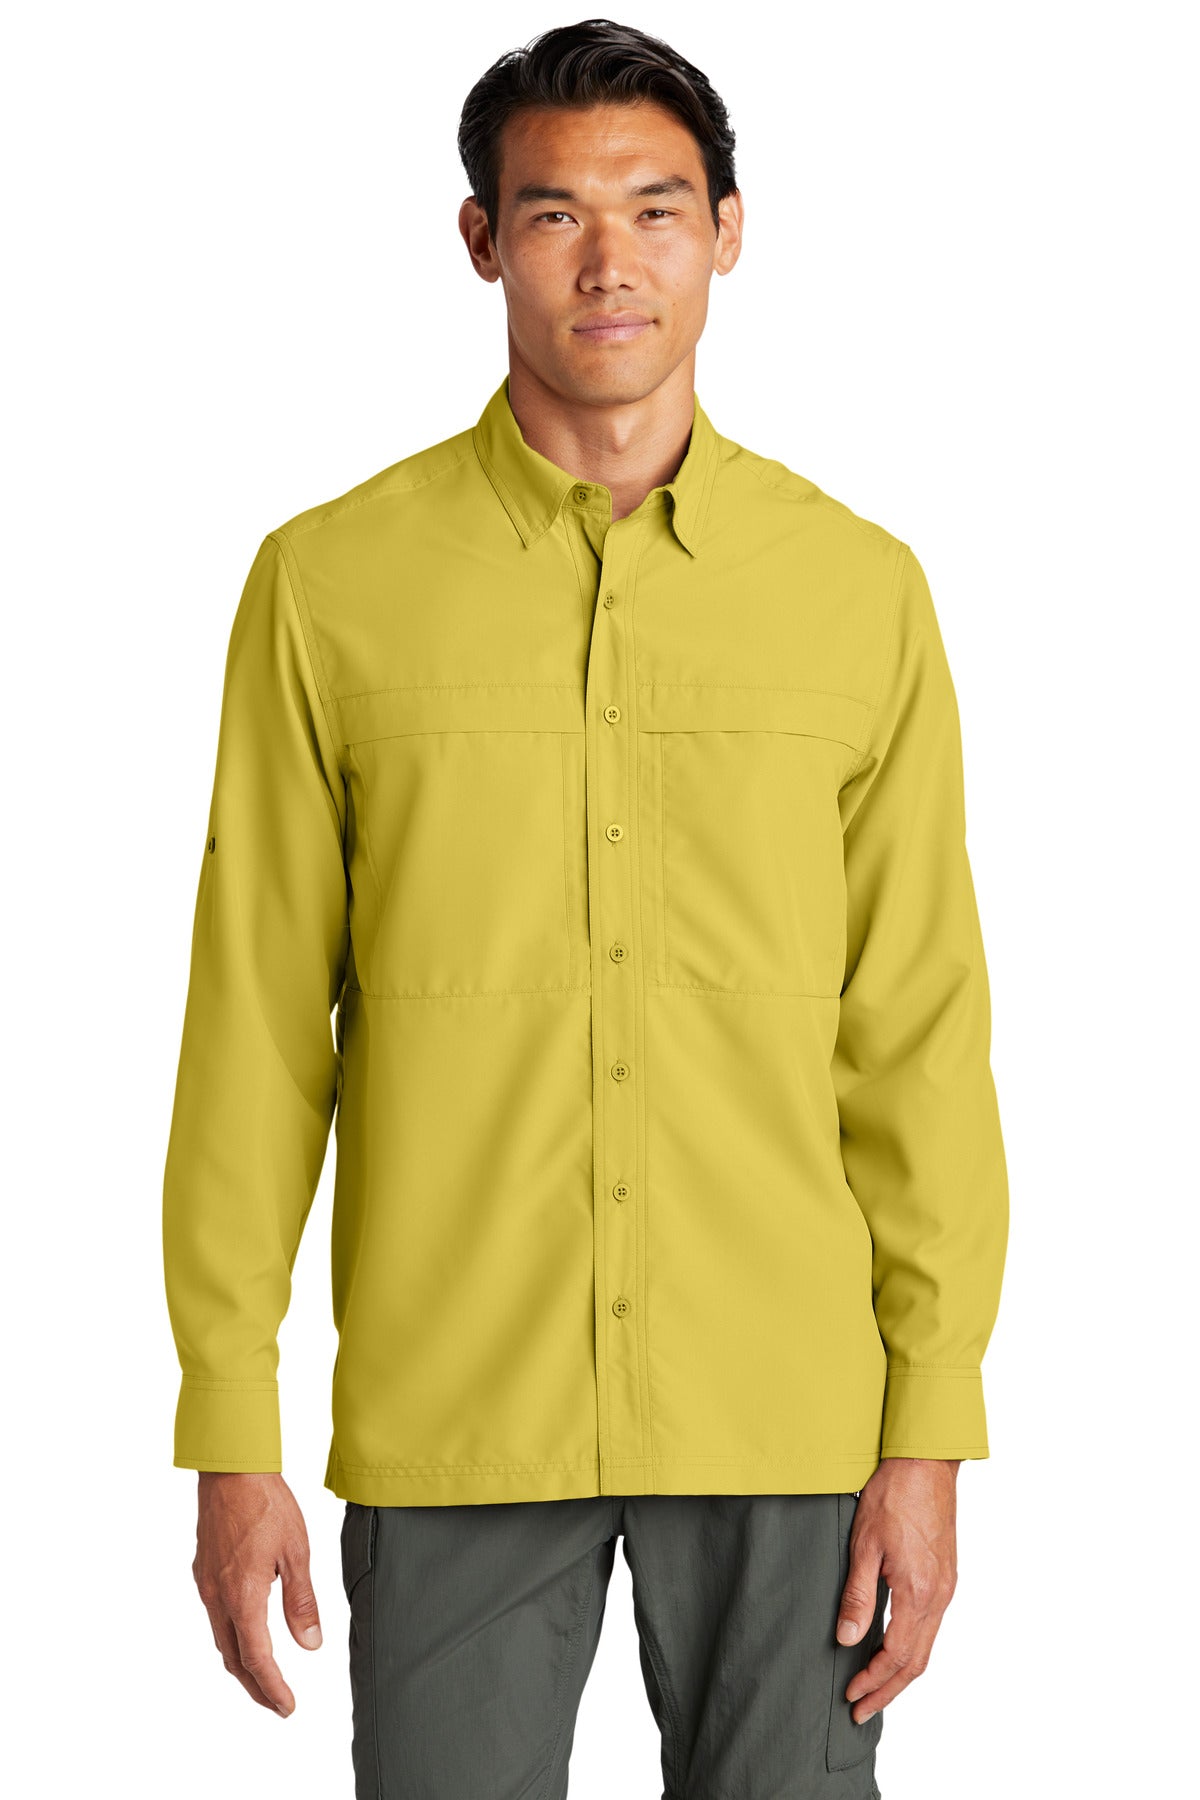 Woven Shirts Yellow Port Authority